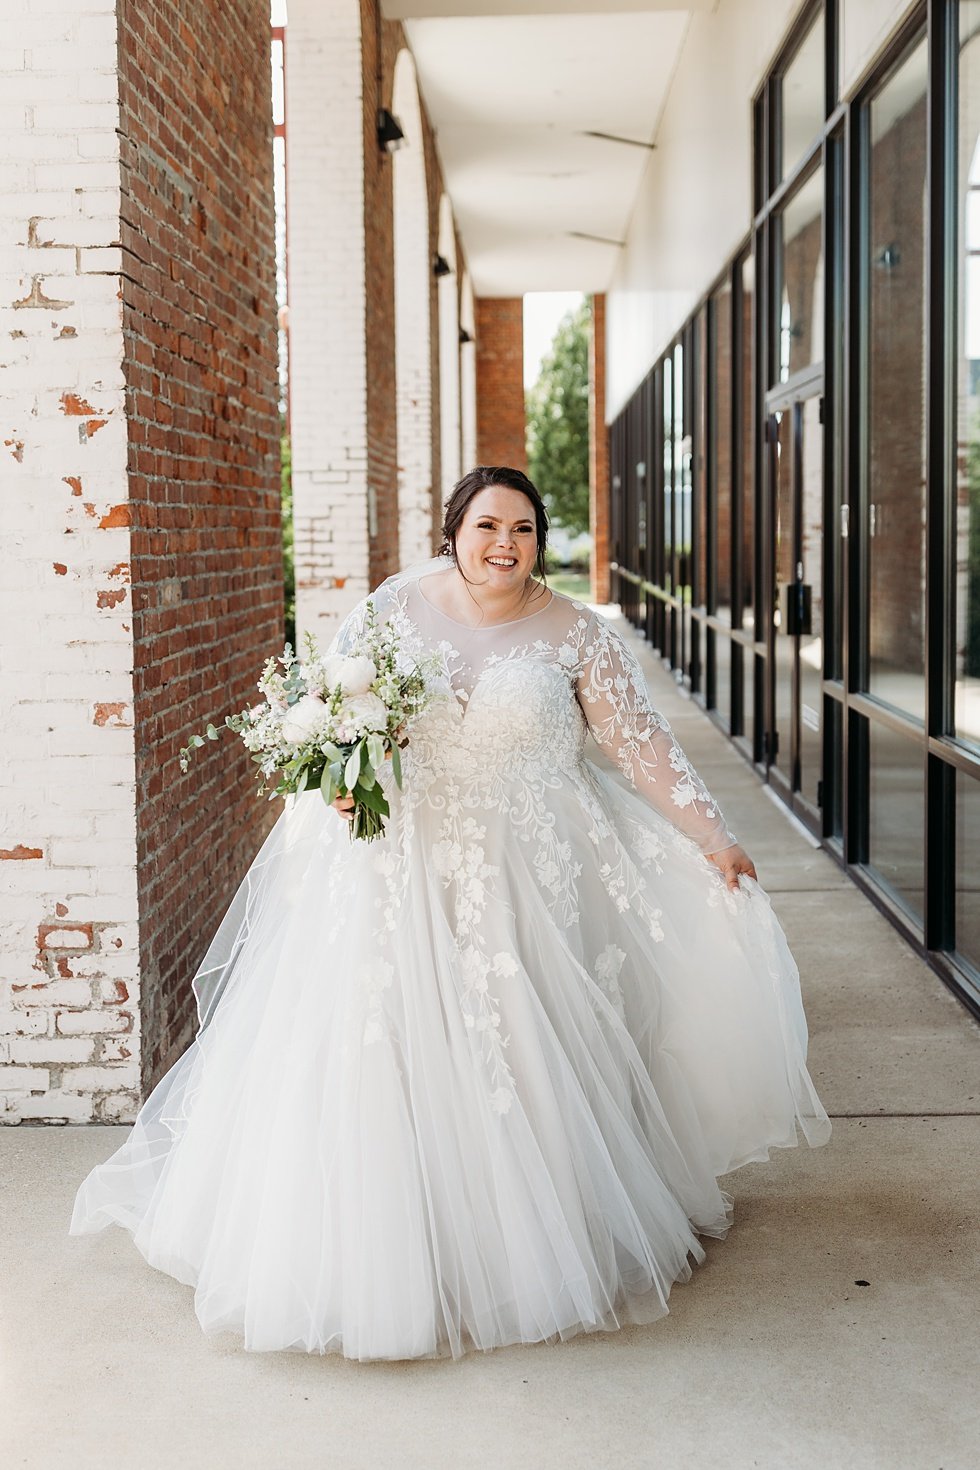  Bridals at the Refinery. Spring wedding at The Refinery Jeffersonville, Indiana 